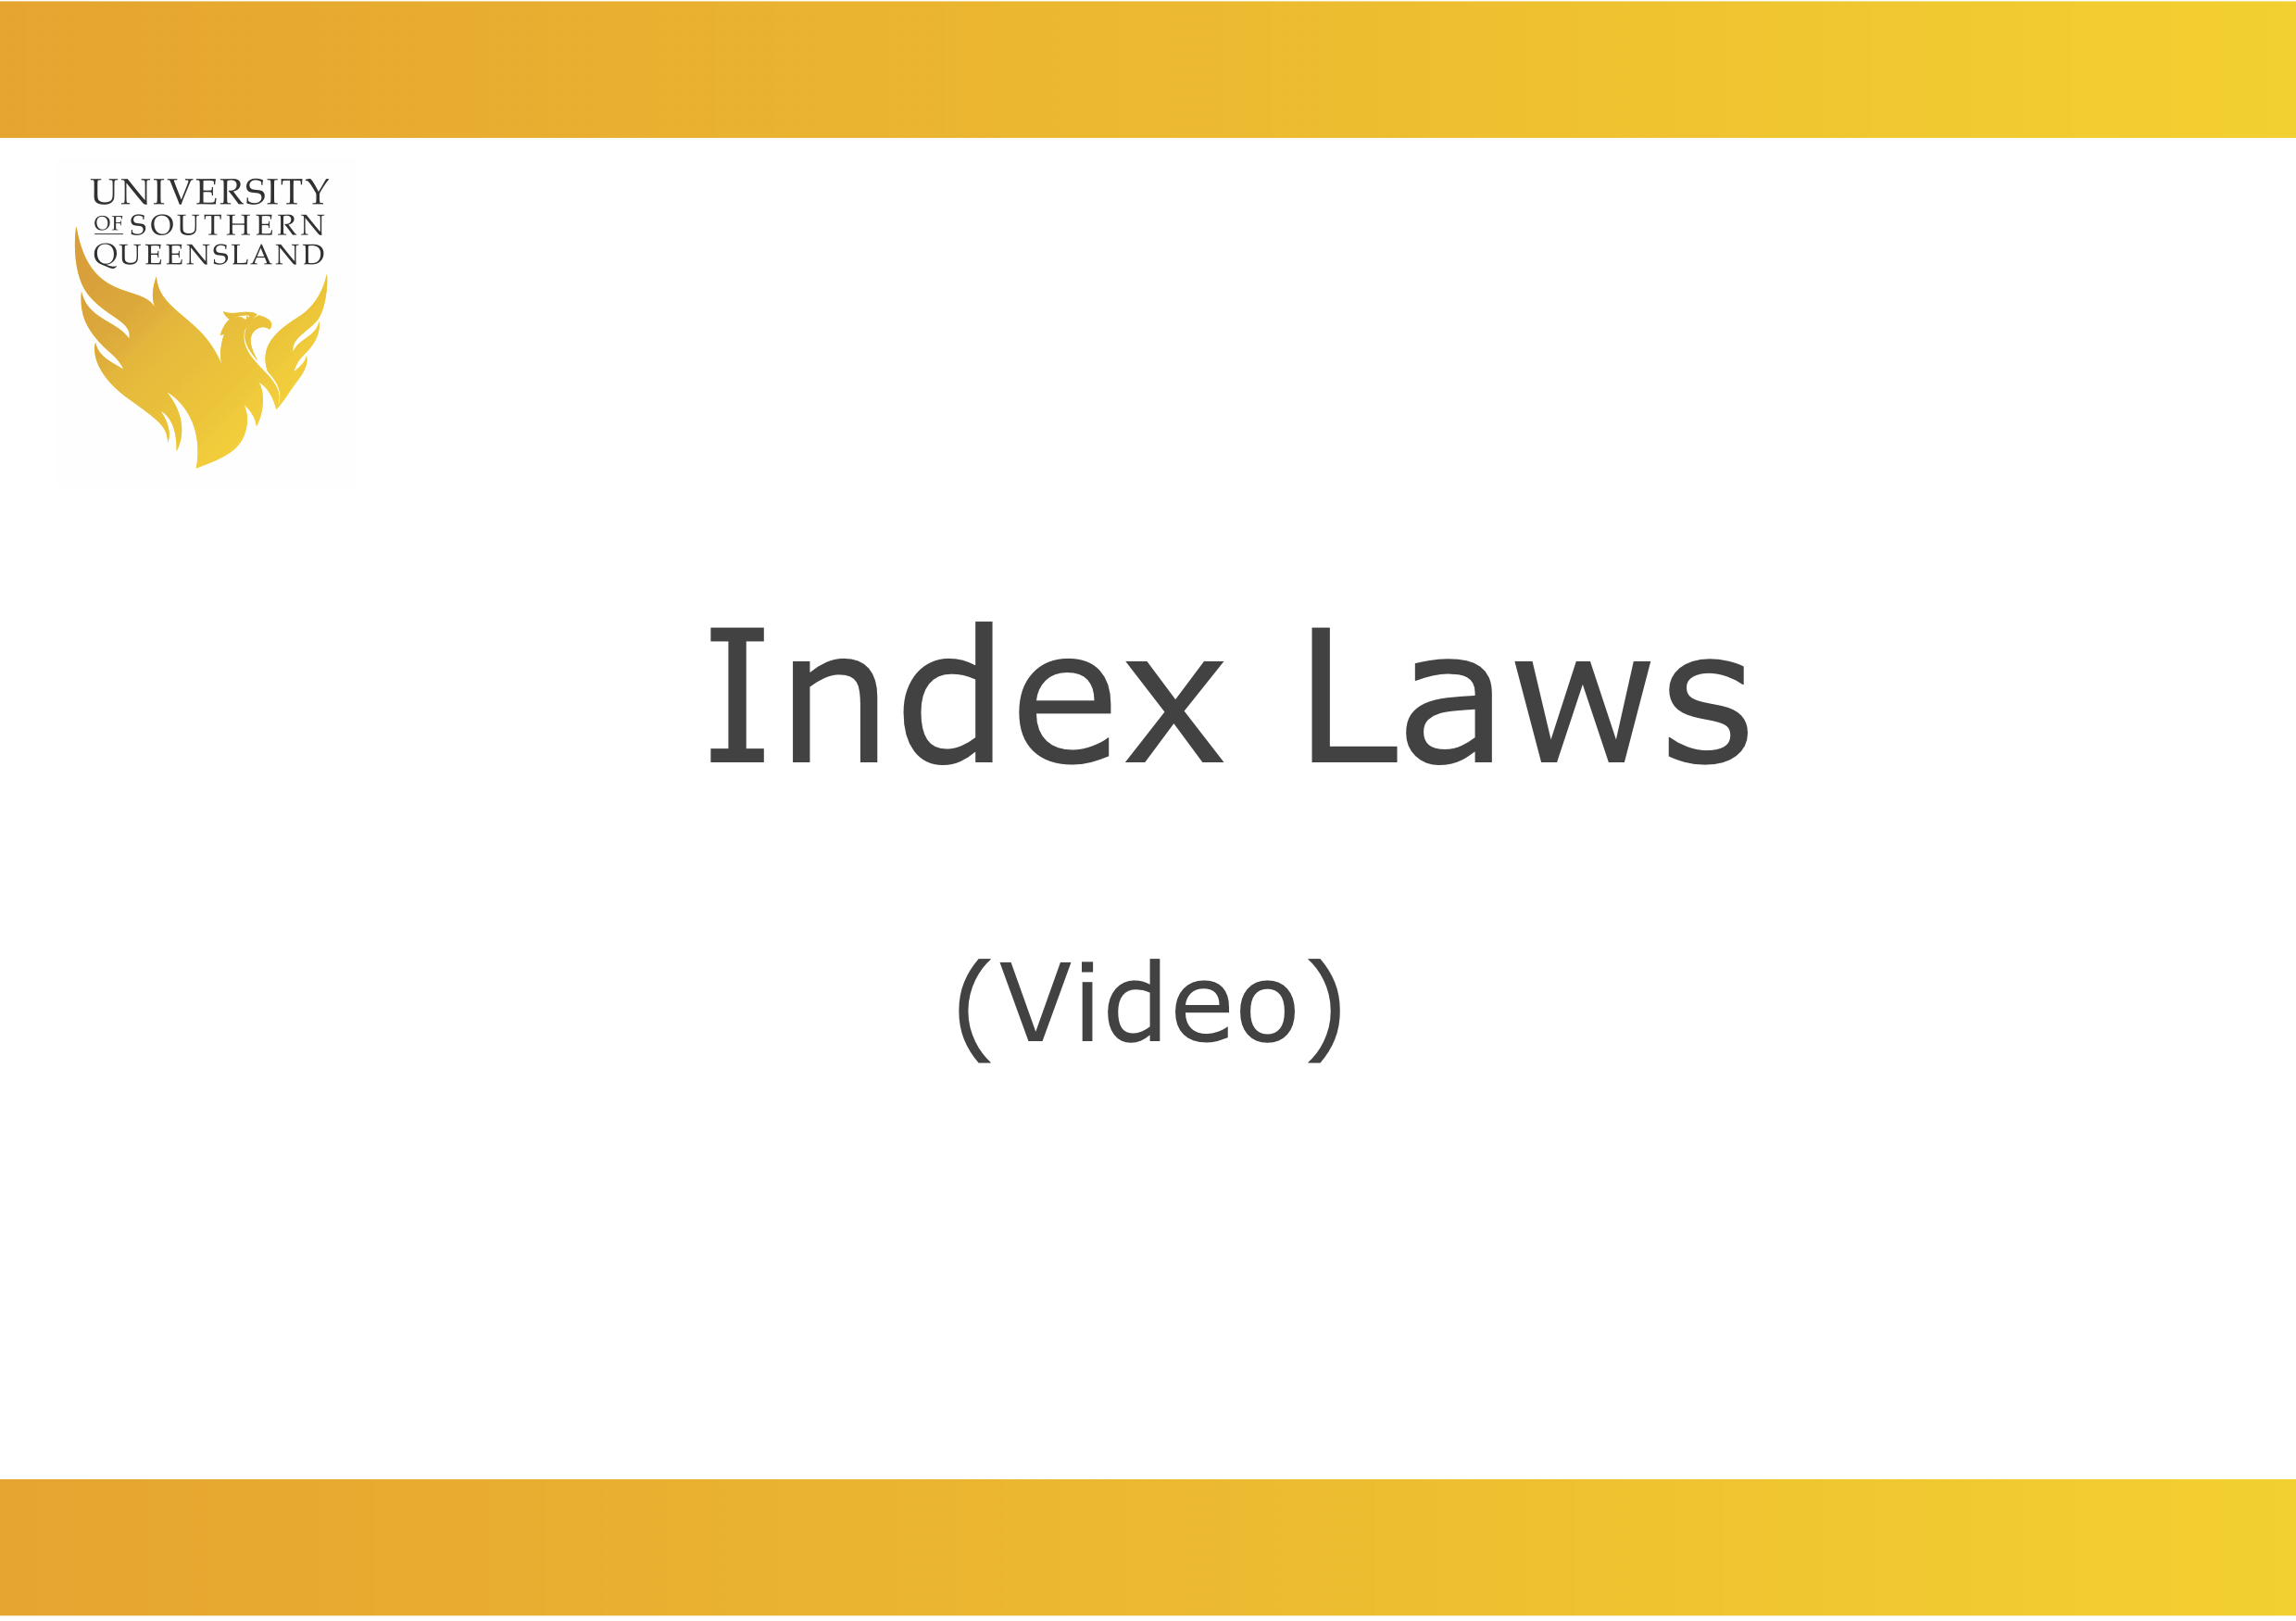 Click on this image to play the video for index laws.